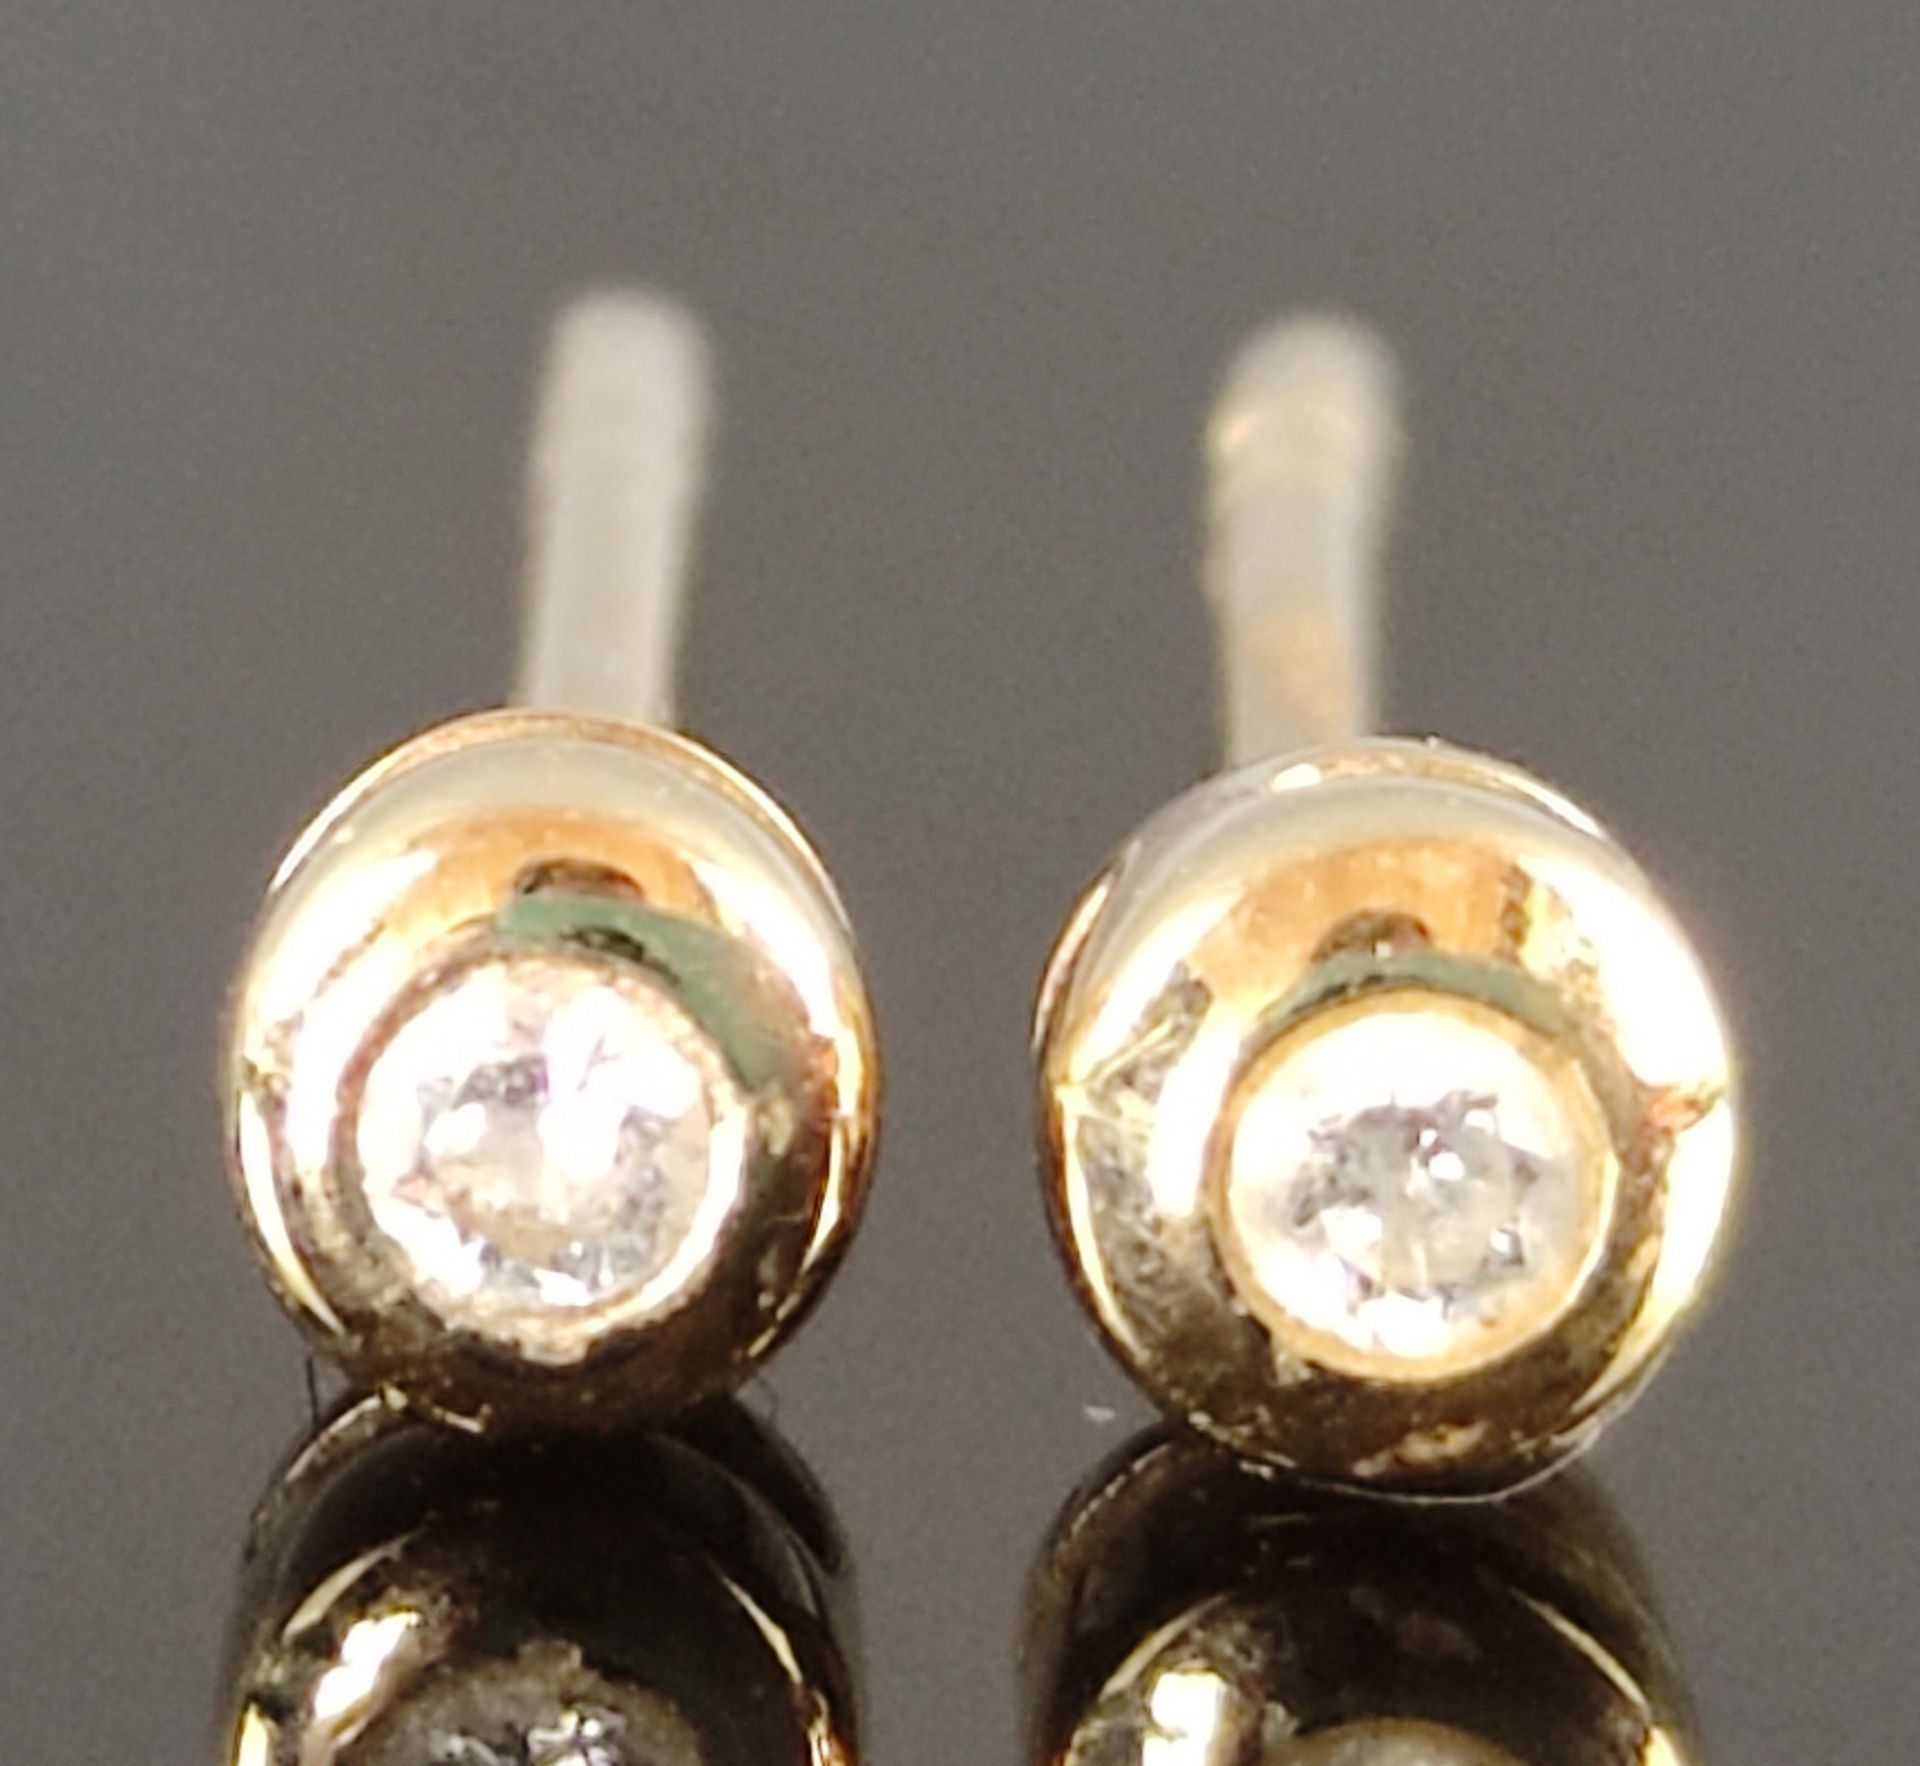 Small stud earrings with small diamonds, 750/18K yellow gold (tested), 0.6g, ear nuts missing